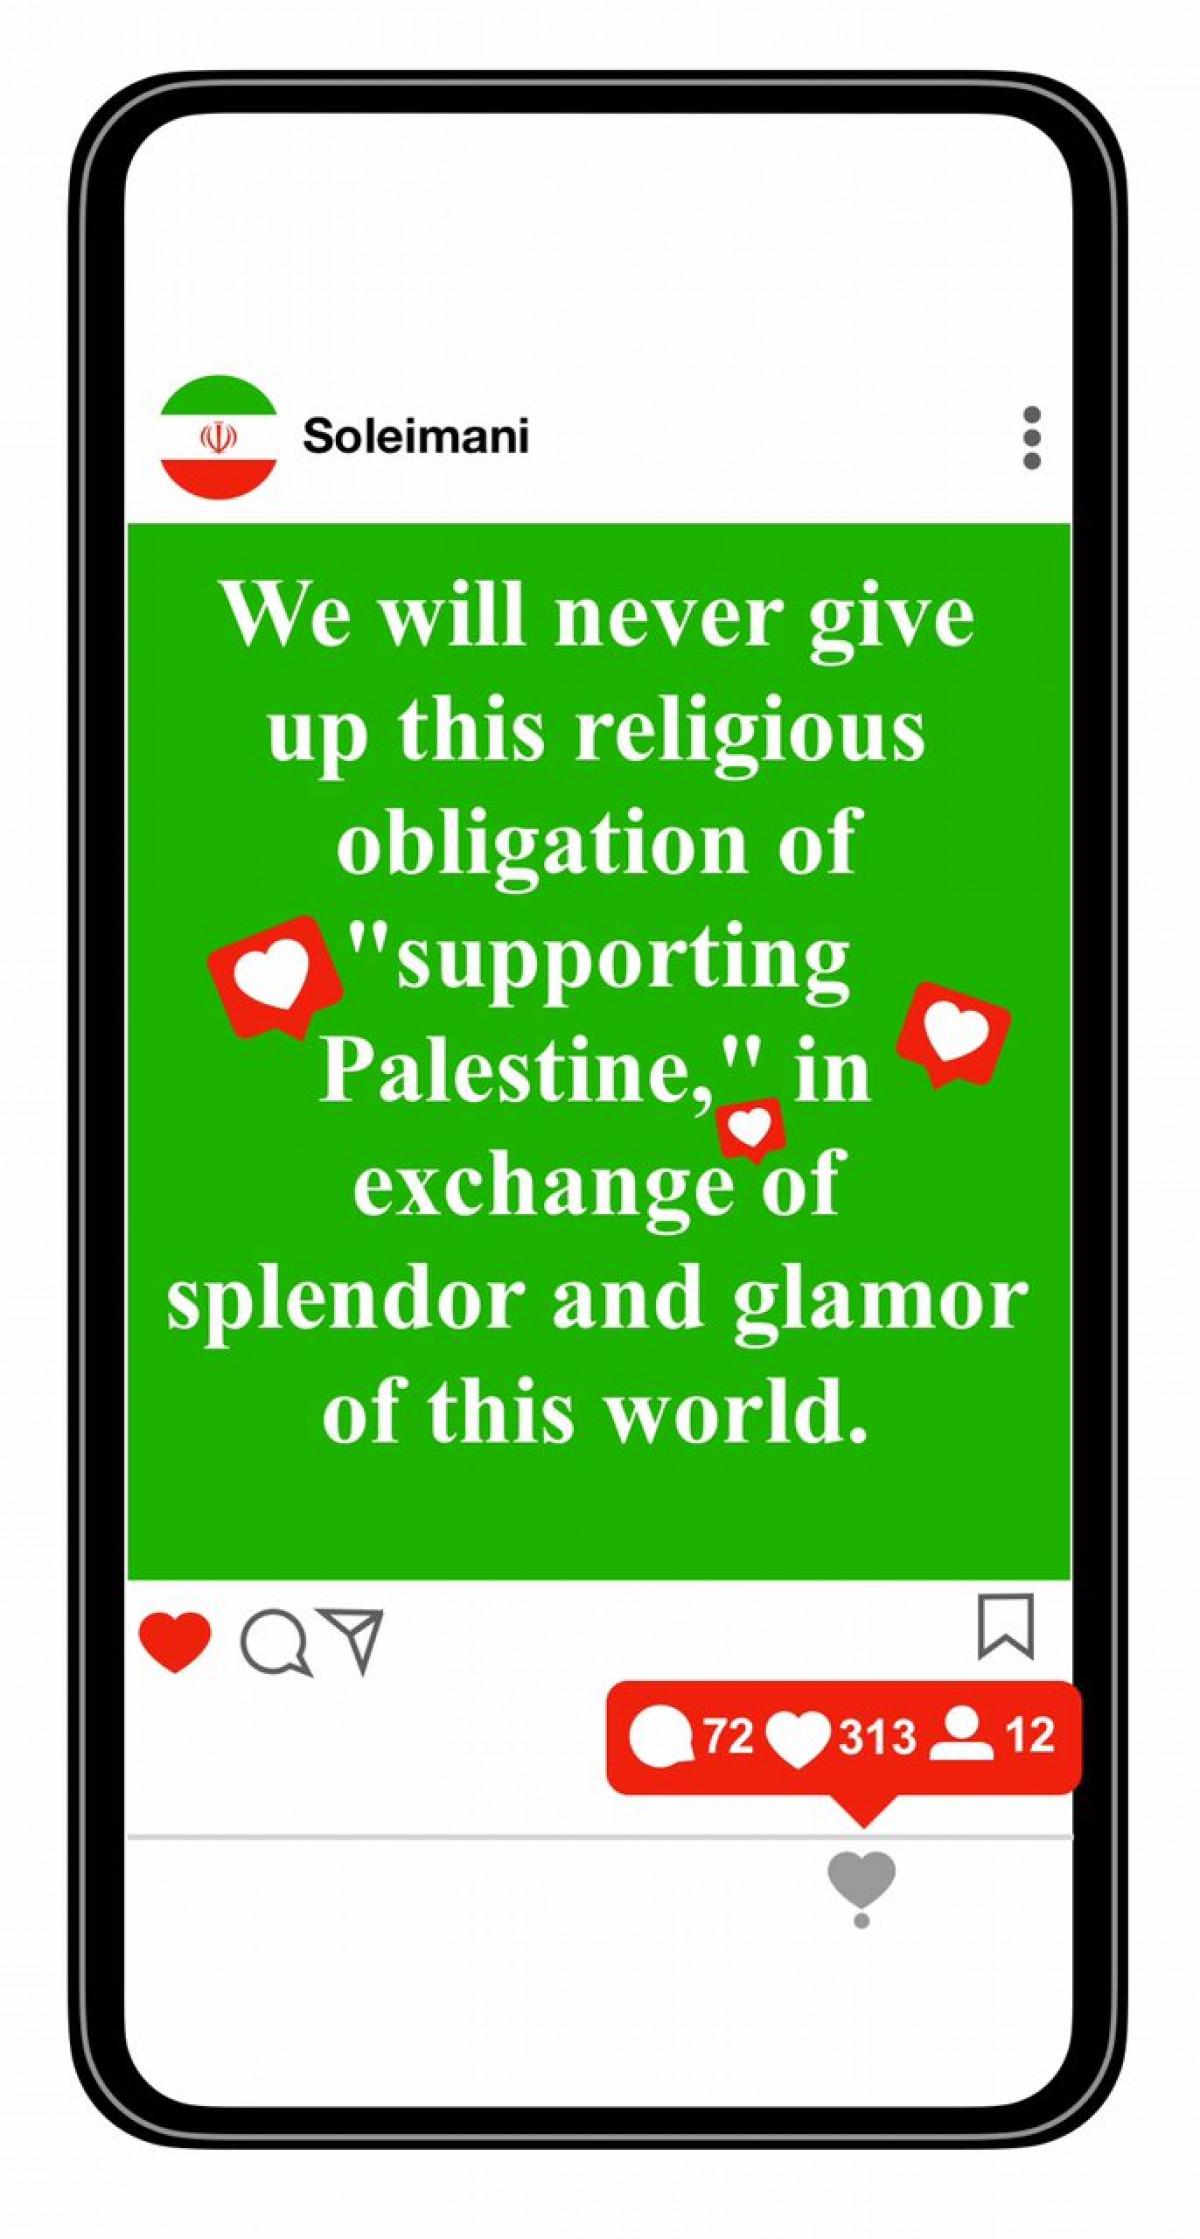 We will never give up this religious obligation of • "supporting Palestine," in exchange of splendor and glamor of this world